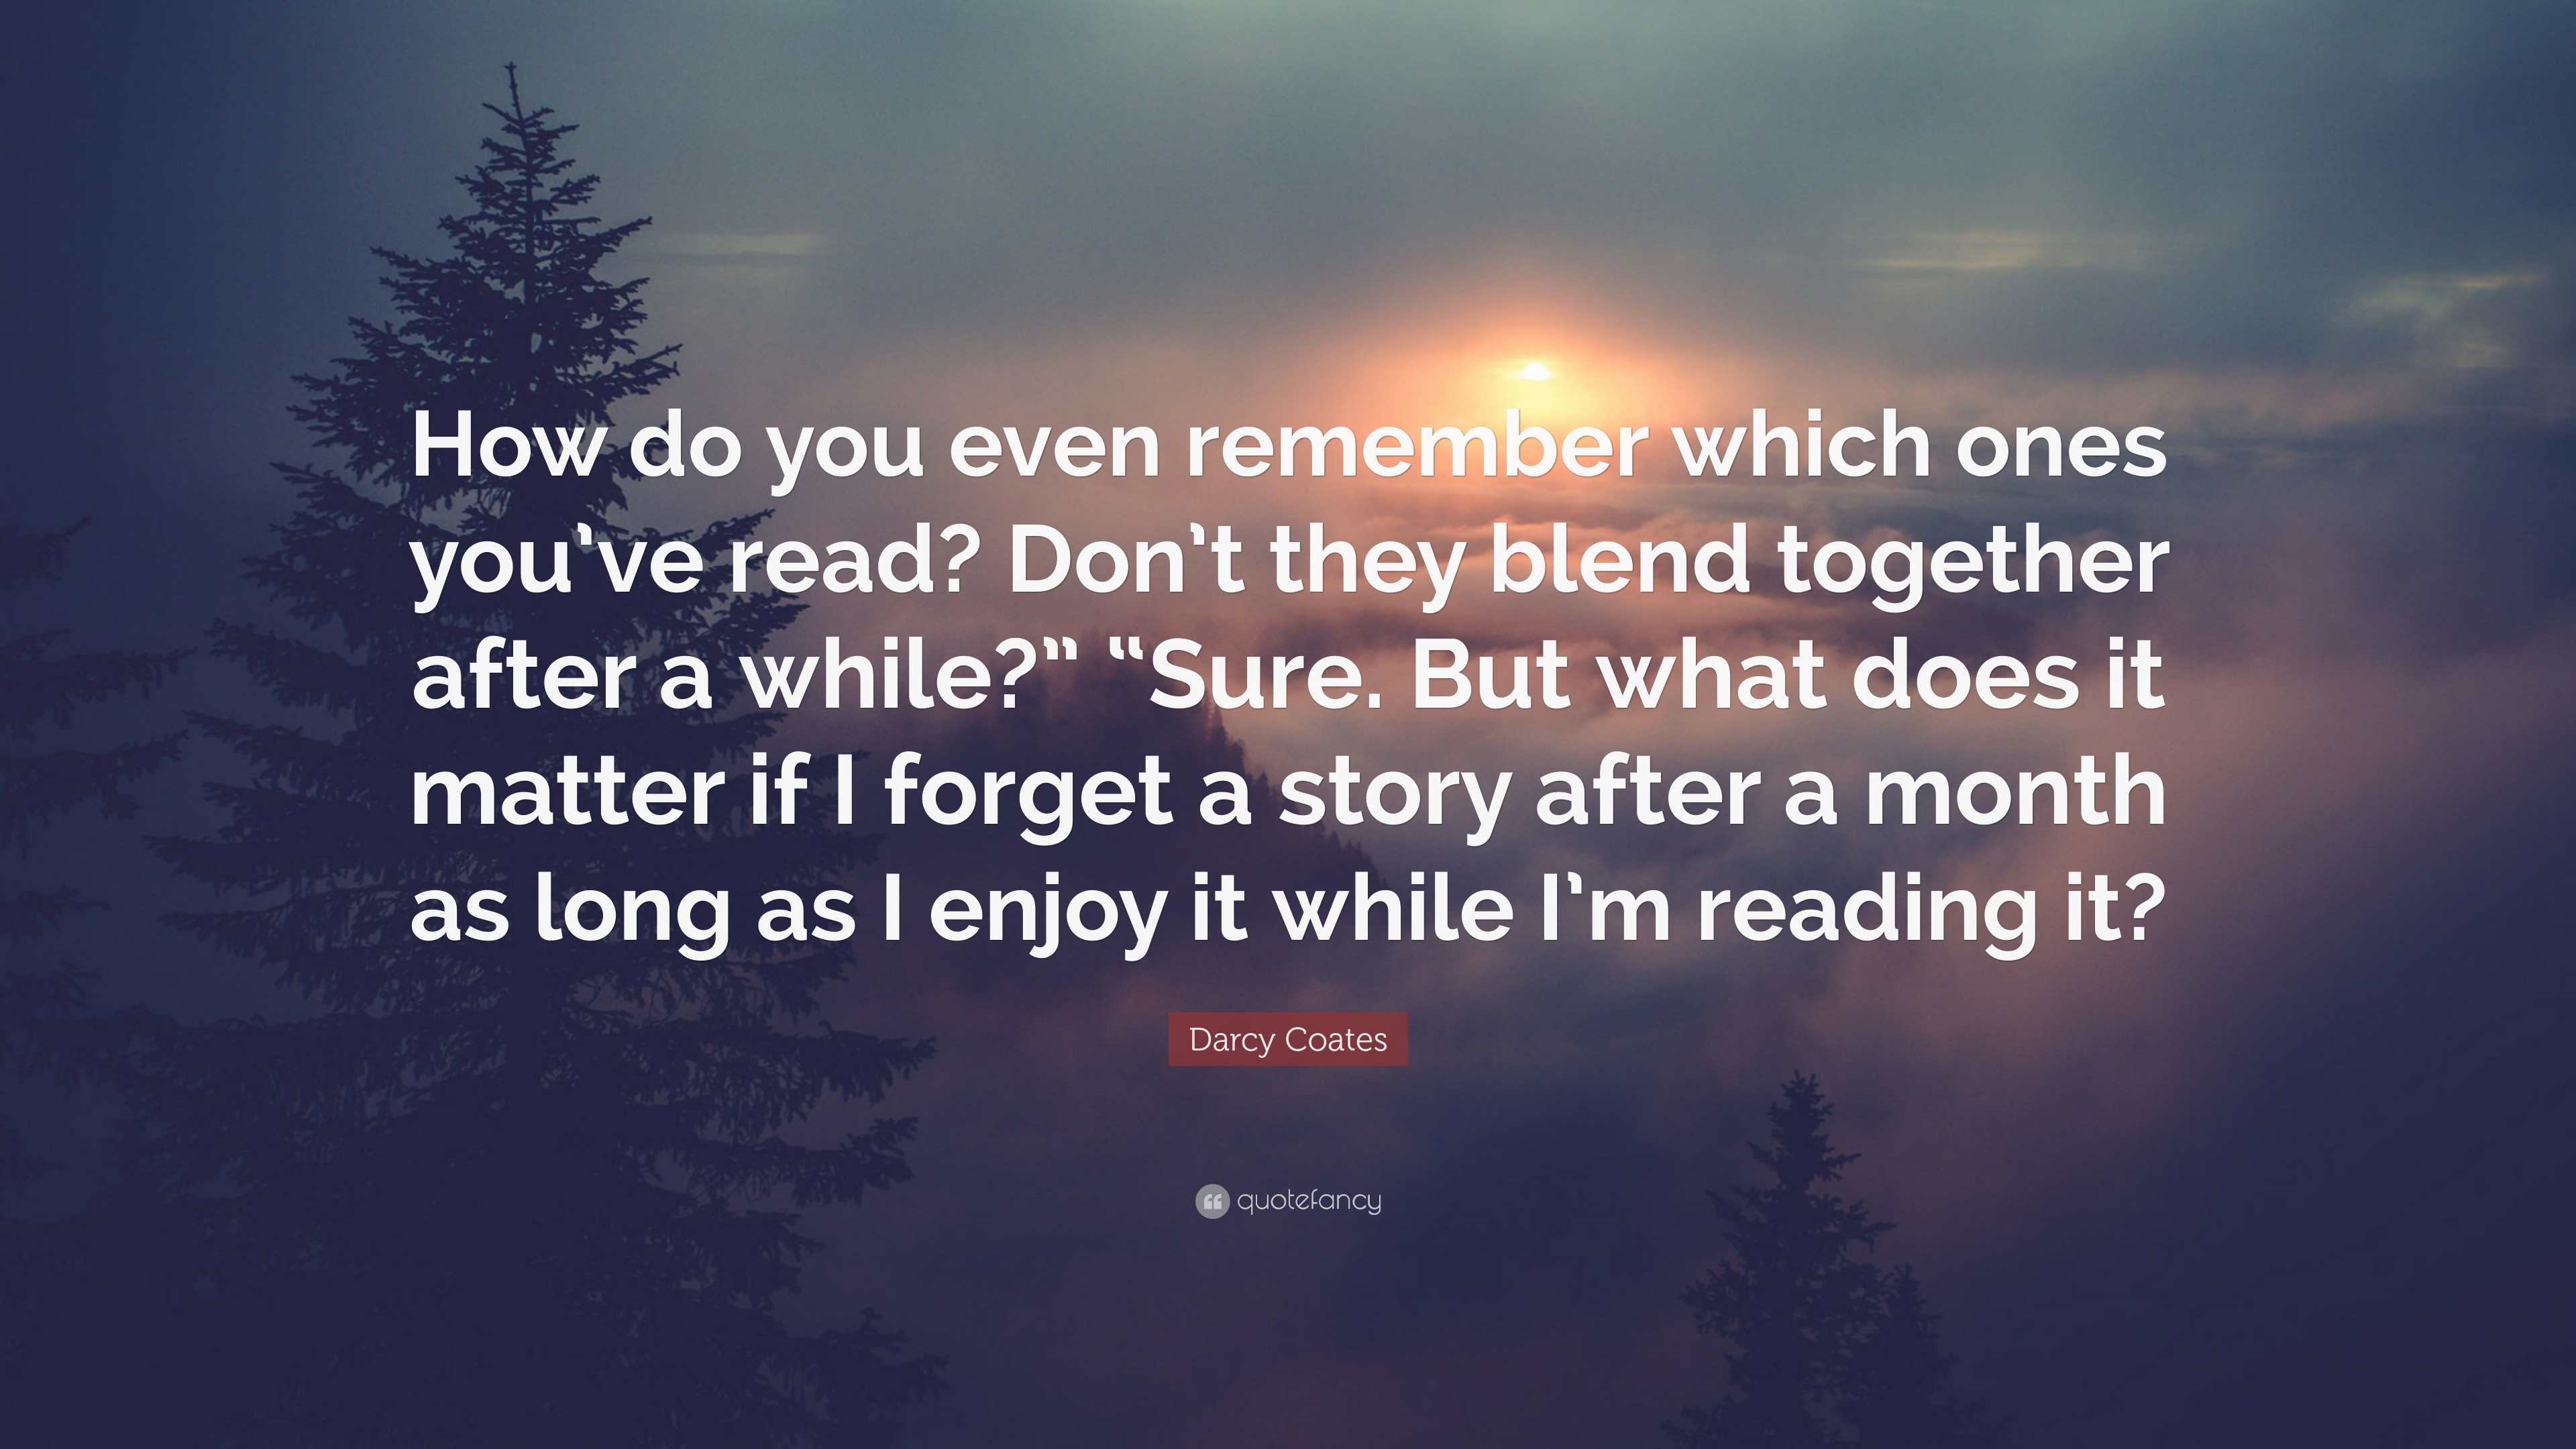 Darcy Coates Quote: “How do you even remember which ones you’ve read ...